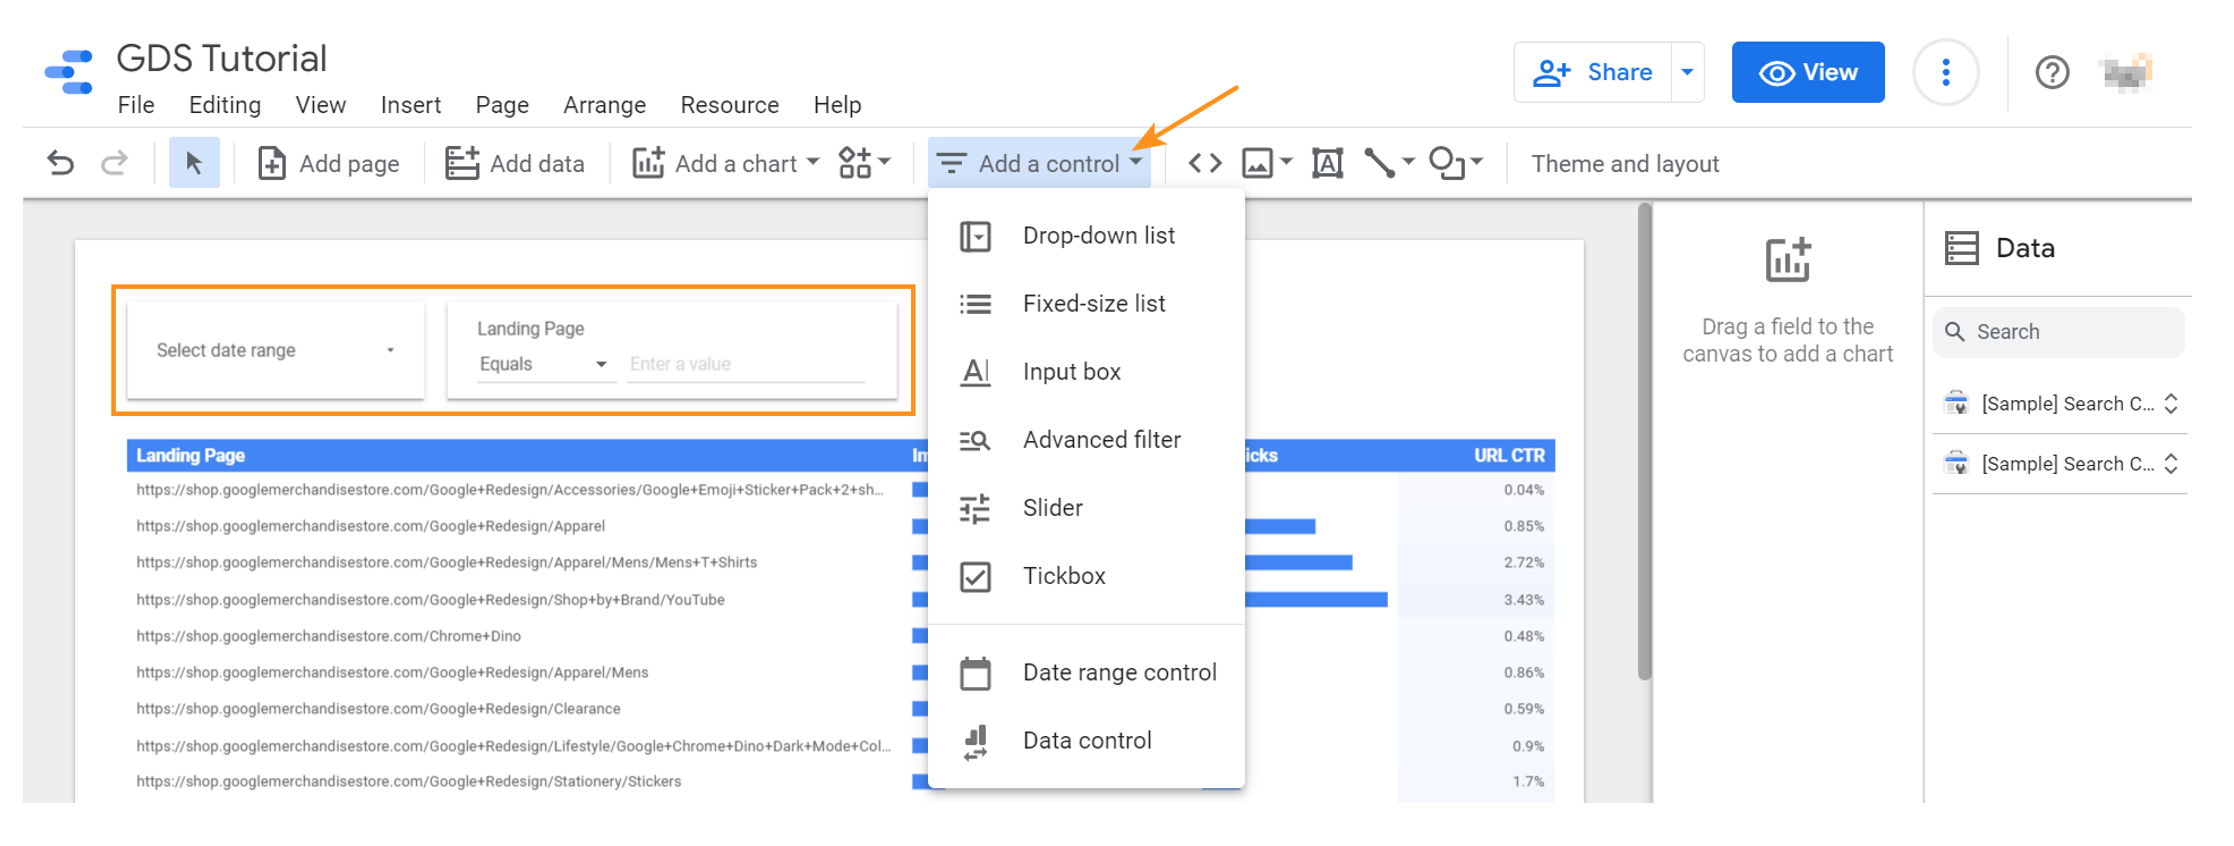 8. Make your Google Data Studio reports interactive by adding toggle controls for filters